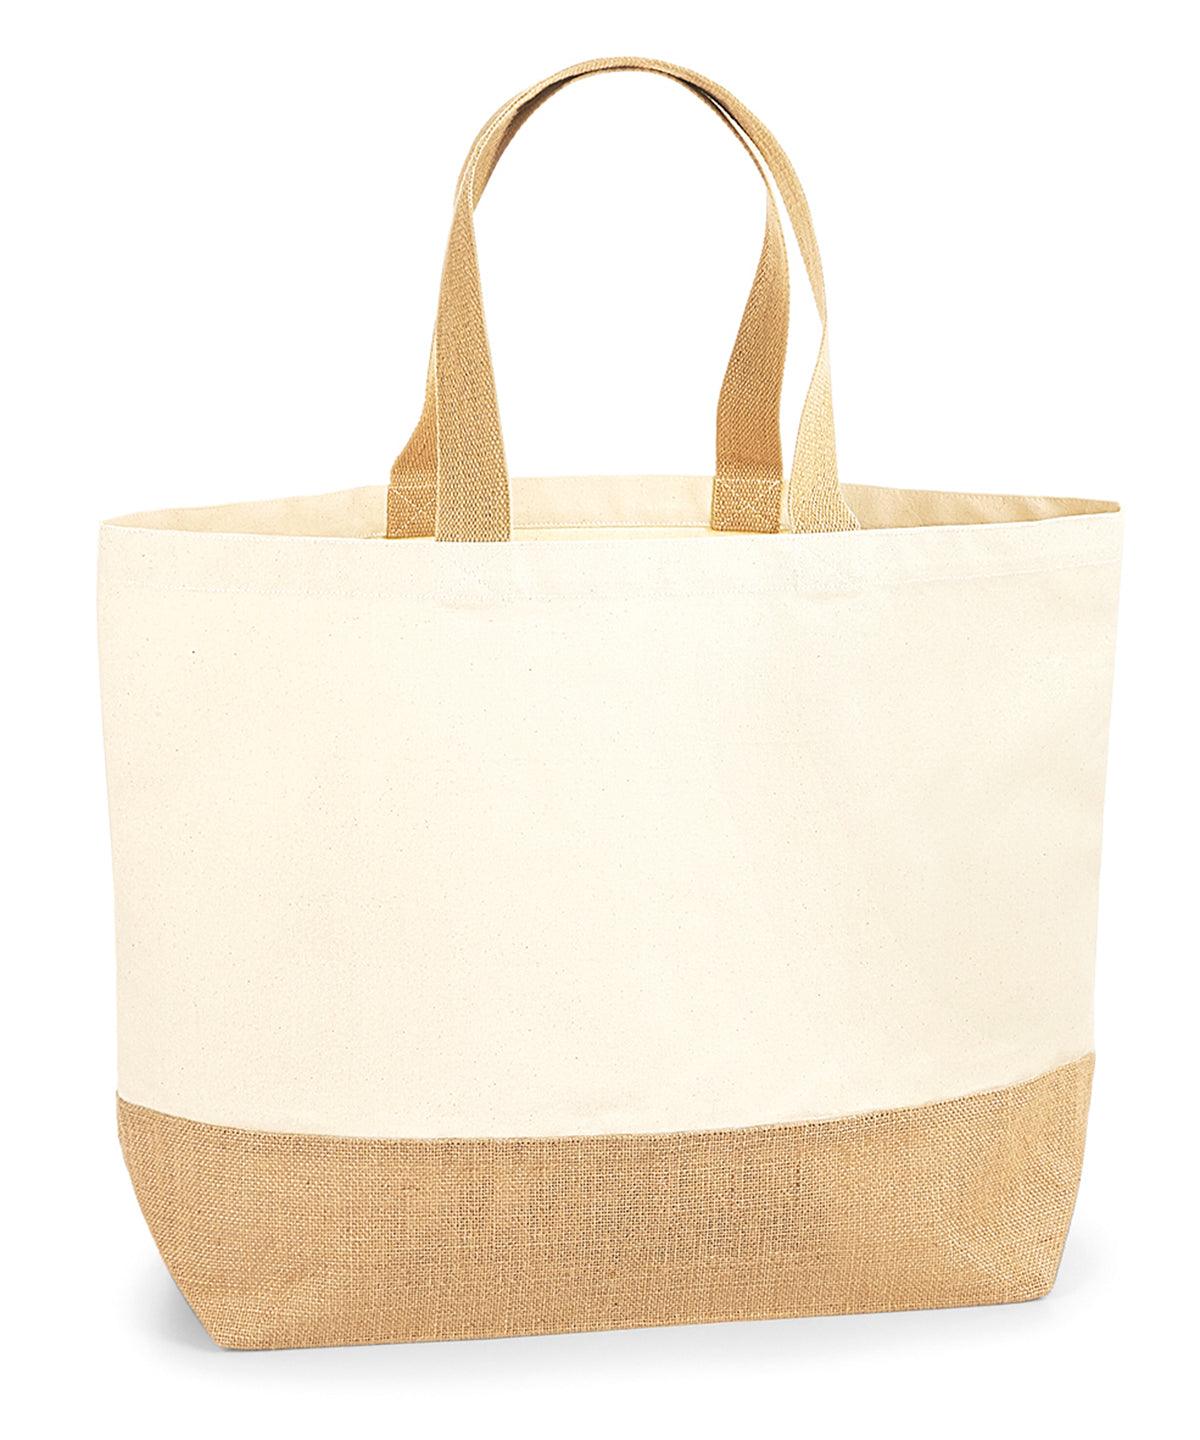 Natural - Jute base canvas tote XL Bags Westford Mill Bags & Luggage, Summer Accessories Schoolwear Centres